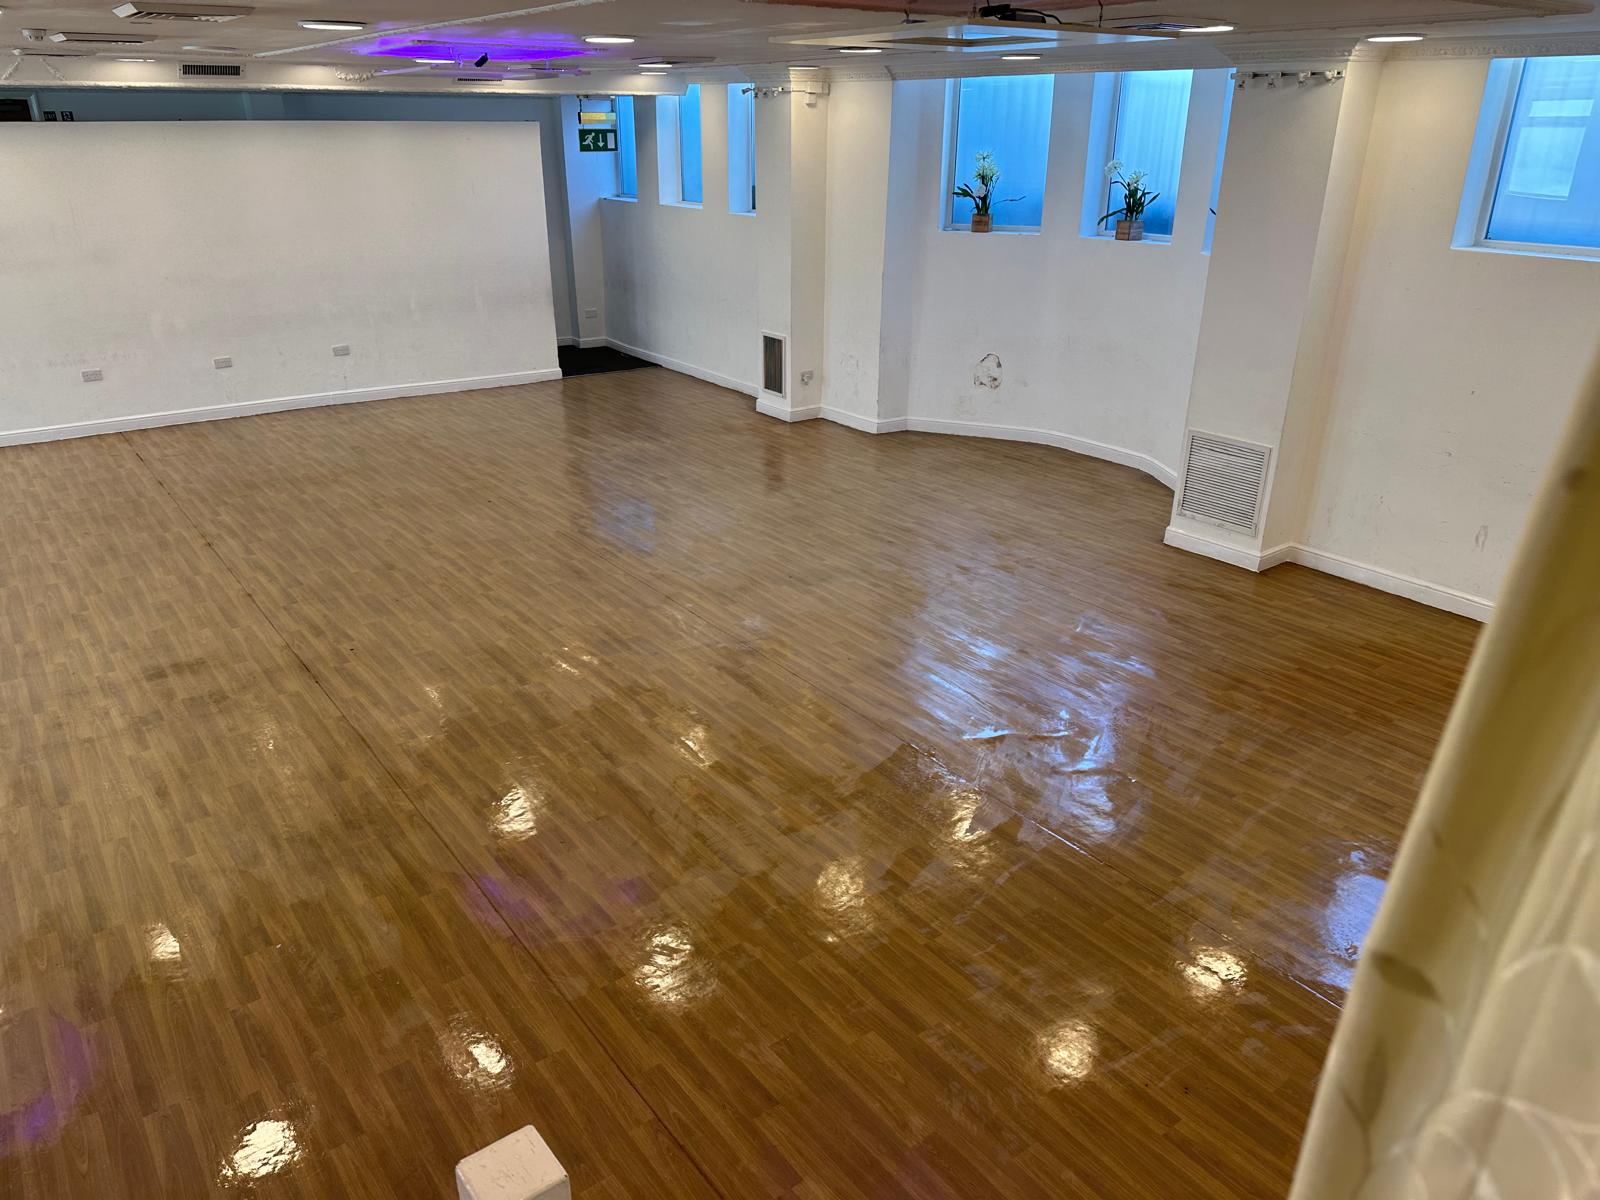 Premium Hard Floor Cleaning And Polishing Services In London